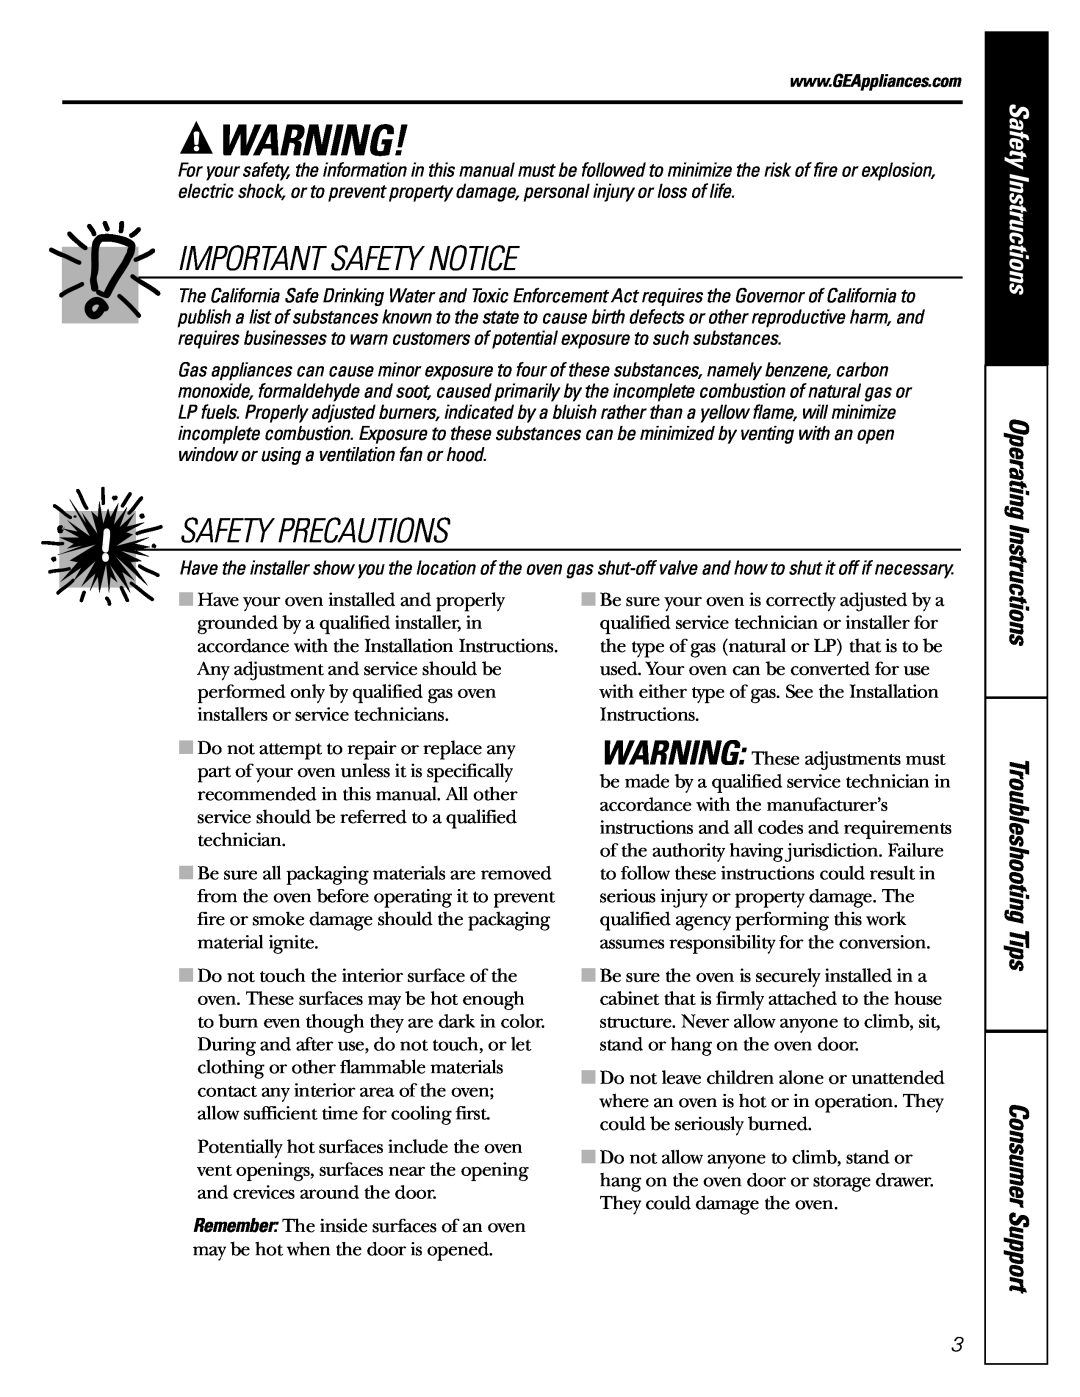 GE JGRP20 Important Safety Notice, Safety Precautions, Troubleshooting Tips, Consumer Support, Safety Instructions 